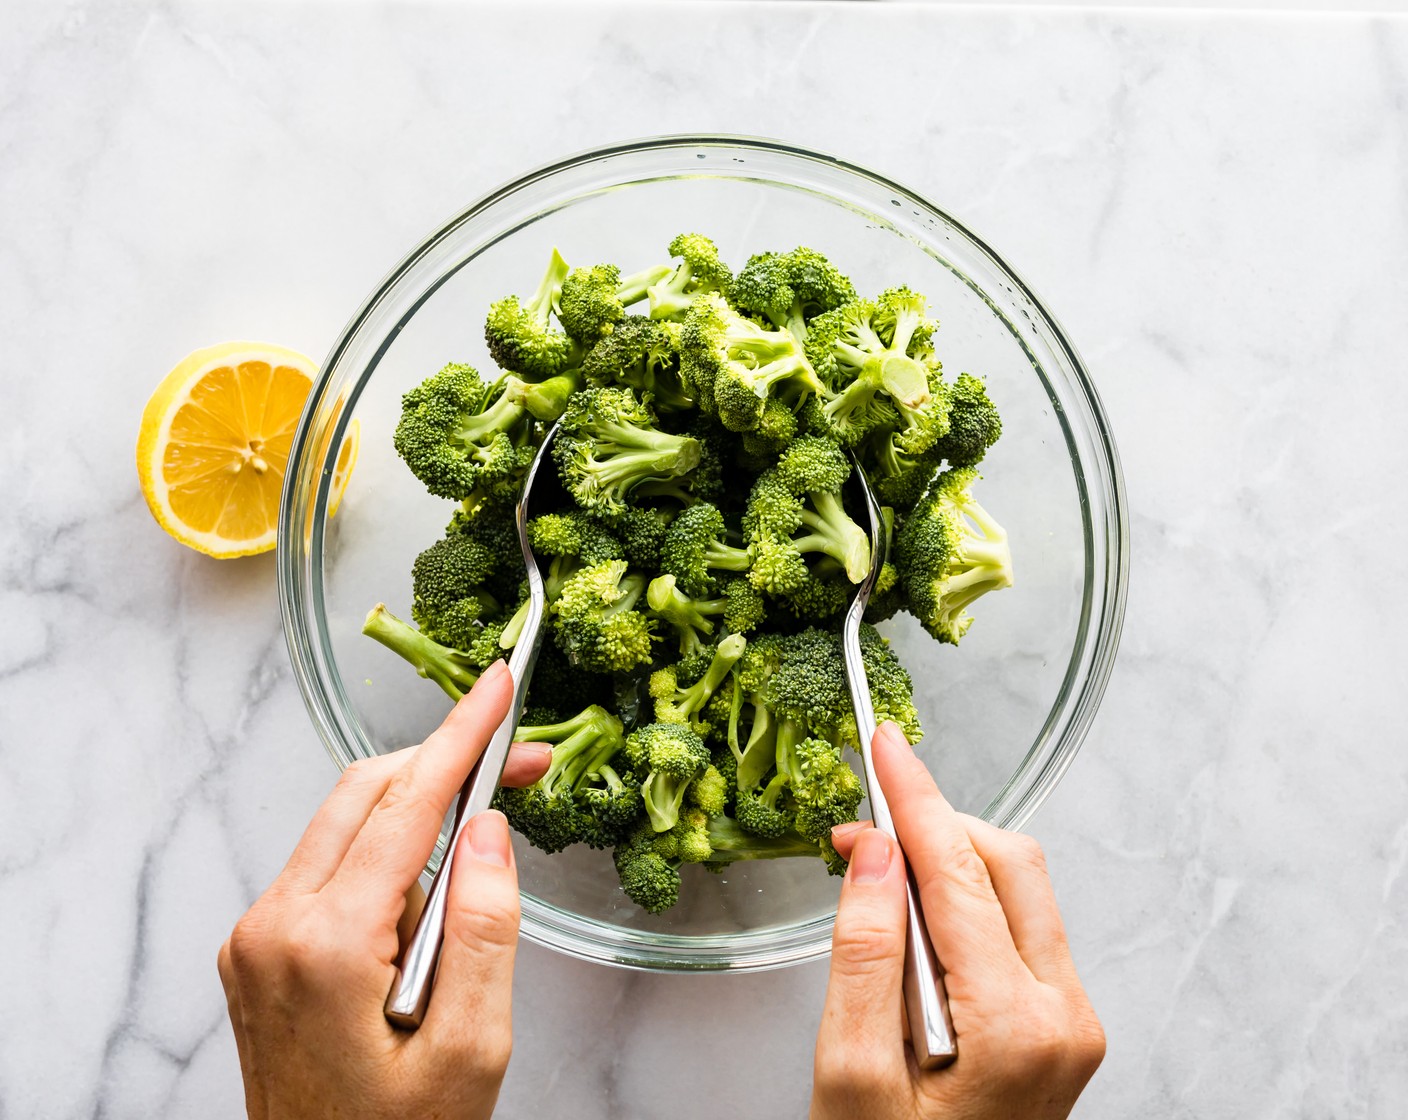 step 7 Next, toss the Broccoli Florets (3 cups) in Olive Oil (1 Tbsp), juice from Lemon (1), and remaining Kosher Salt (1/2 tsp) and Ground Black Pepper (1/2 tsp).